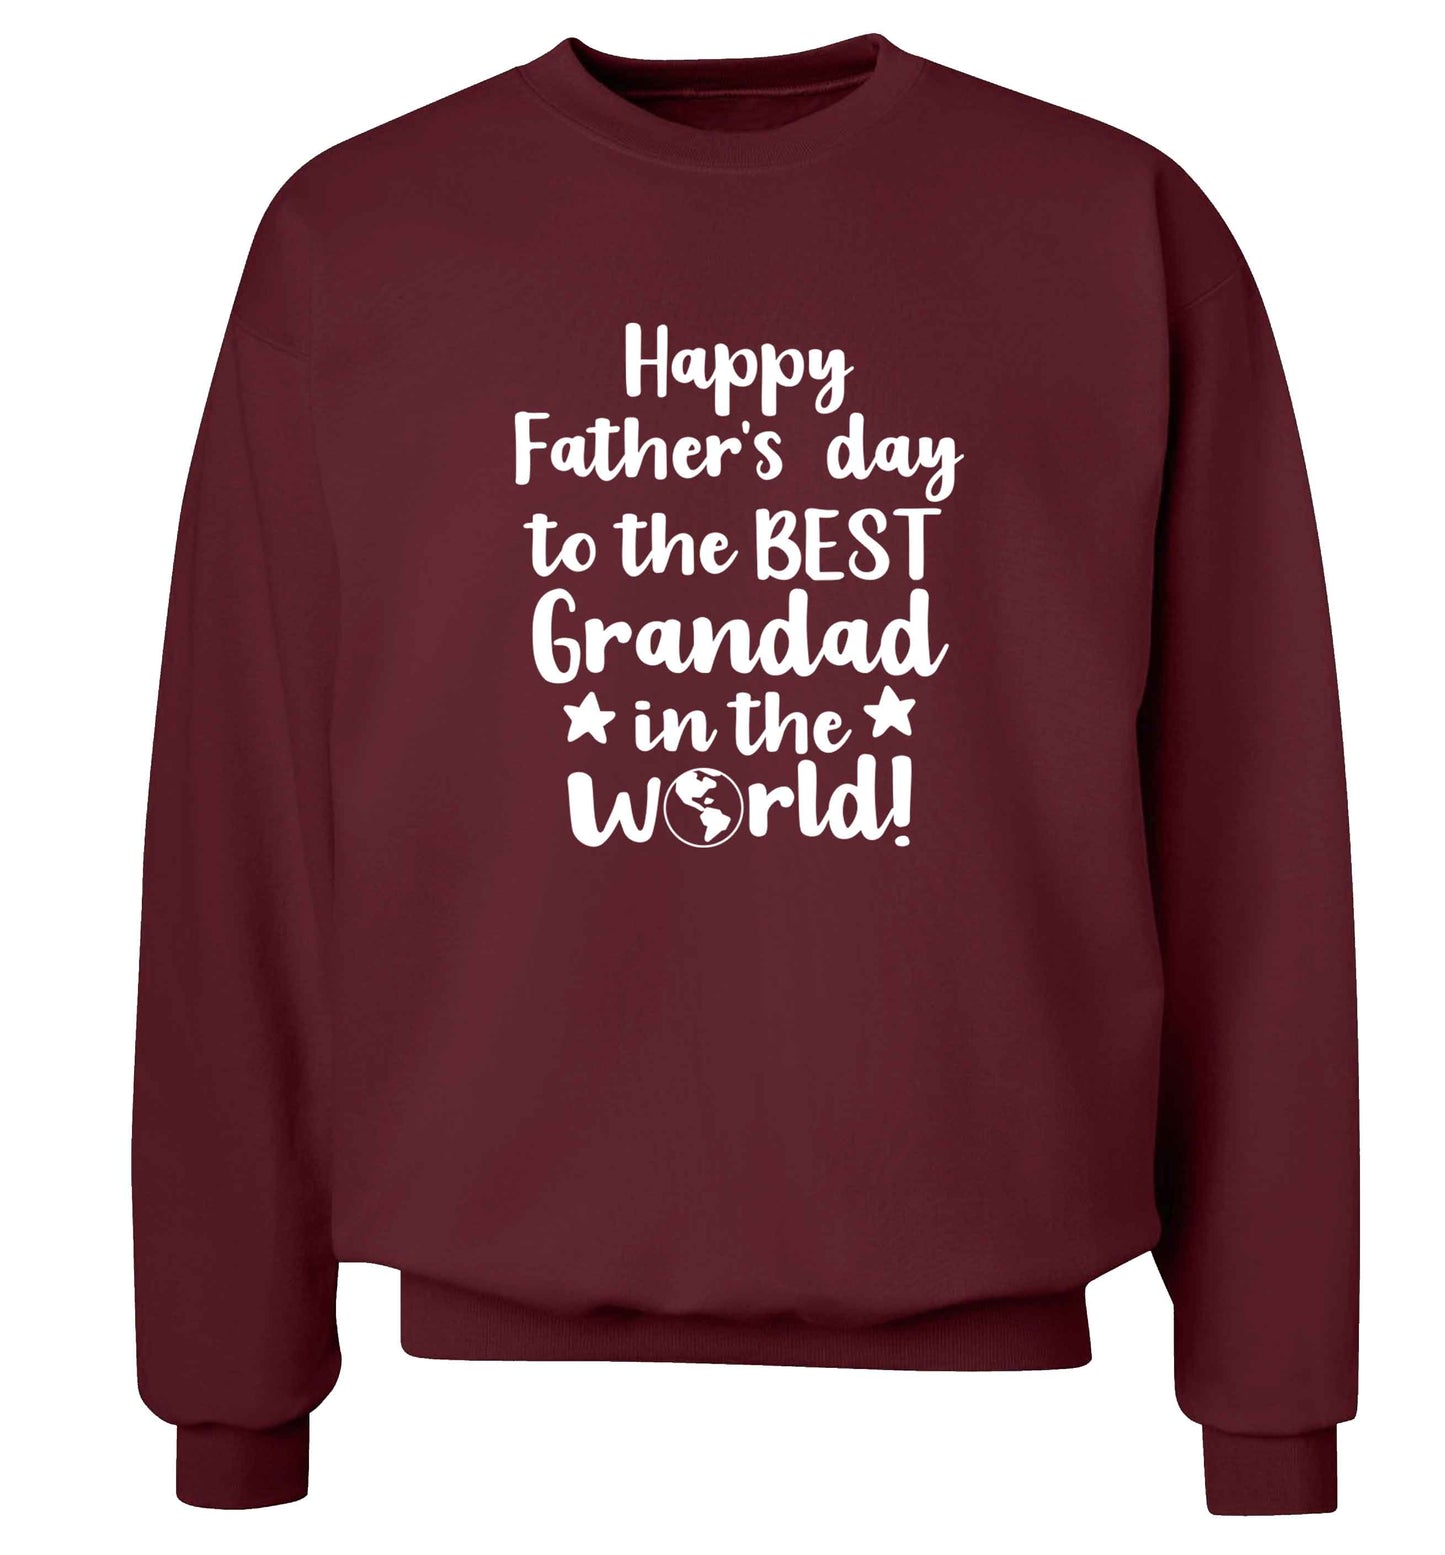 Happy Father's day to the best grandad in the world adult's unisex maroon sweater 2XL